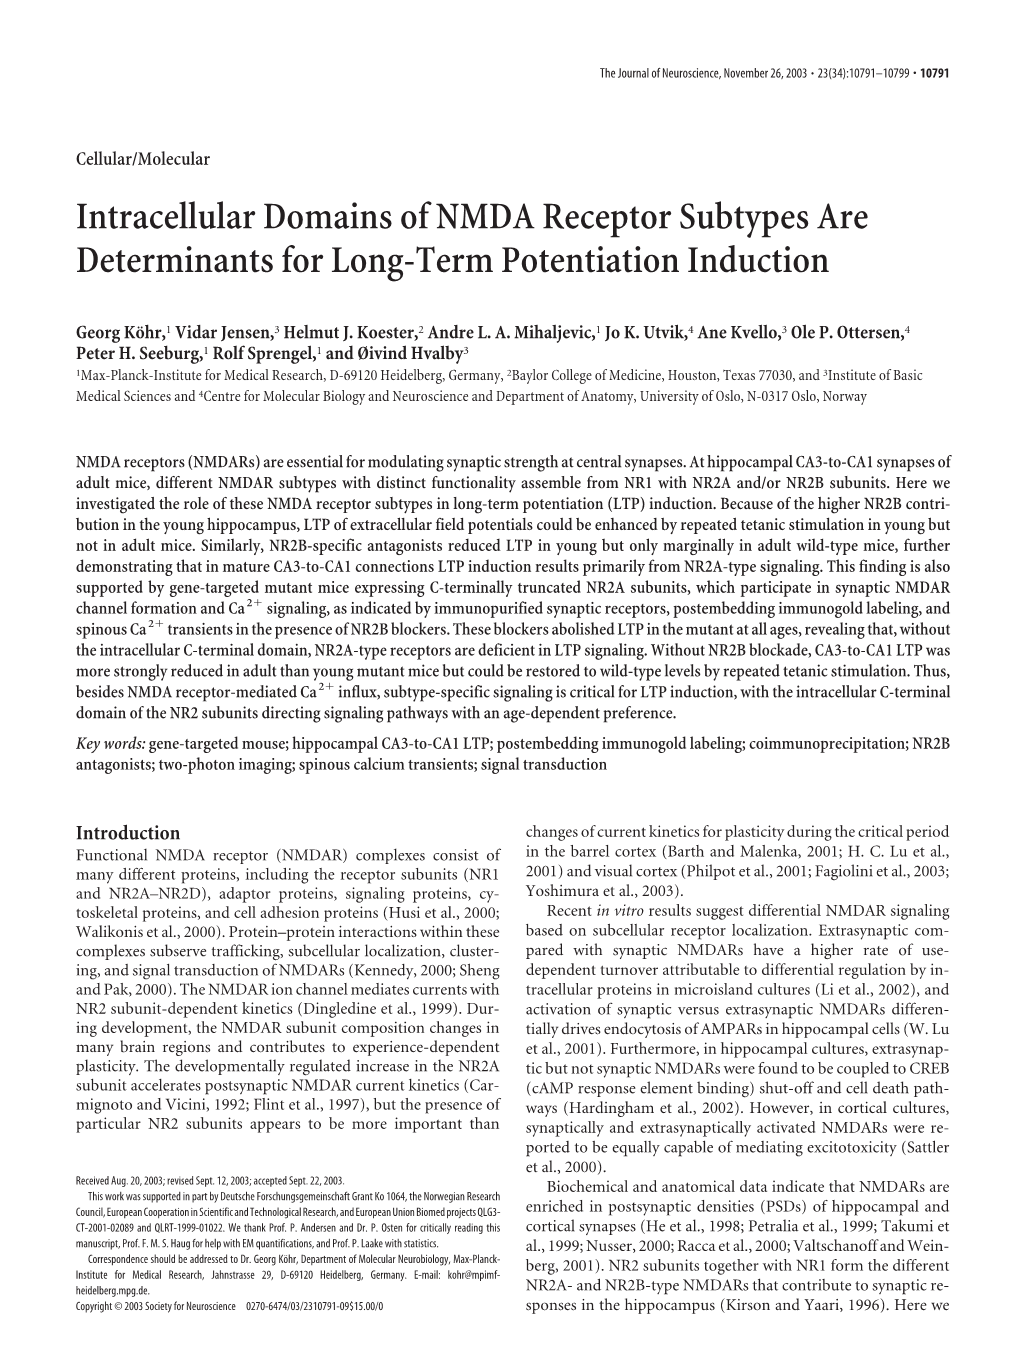 Intracellular Domains of NMDA Receptor Subtypes Are Determinants for Long-Term Potentiation Induction